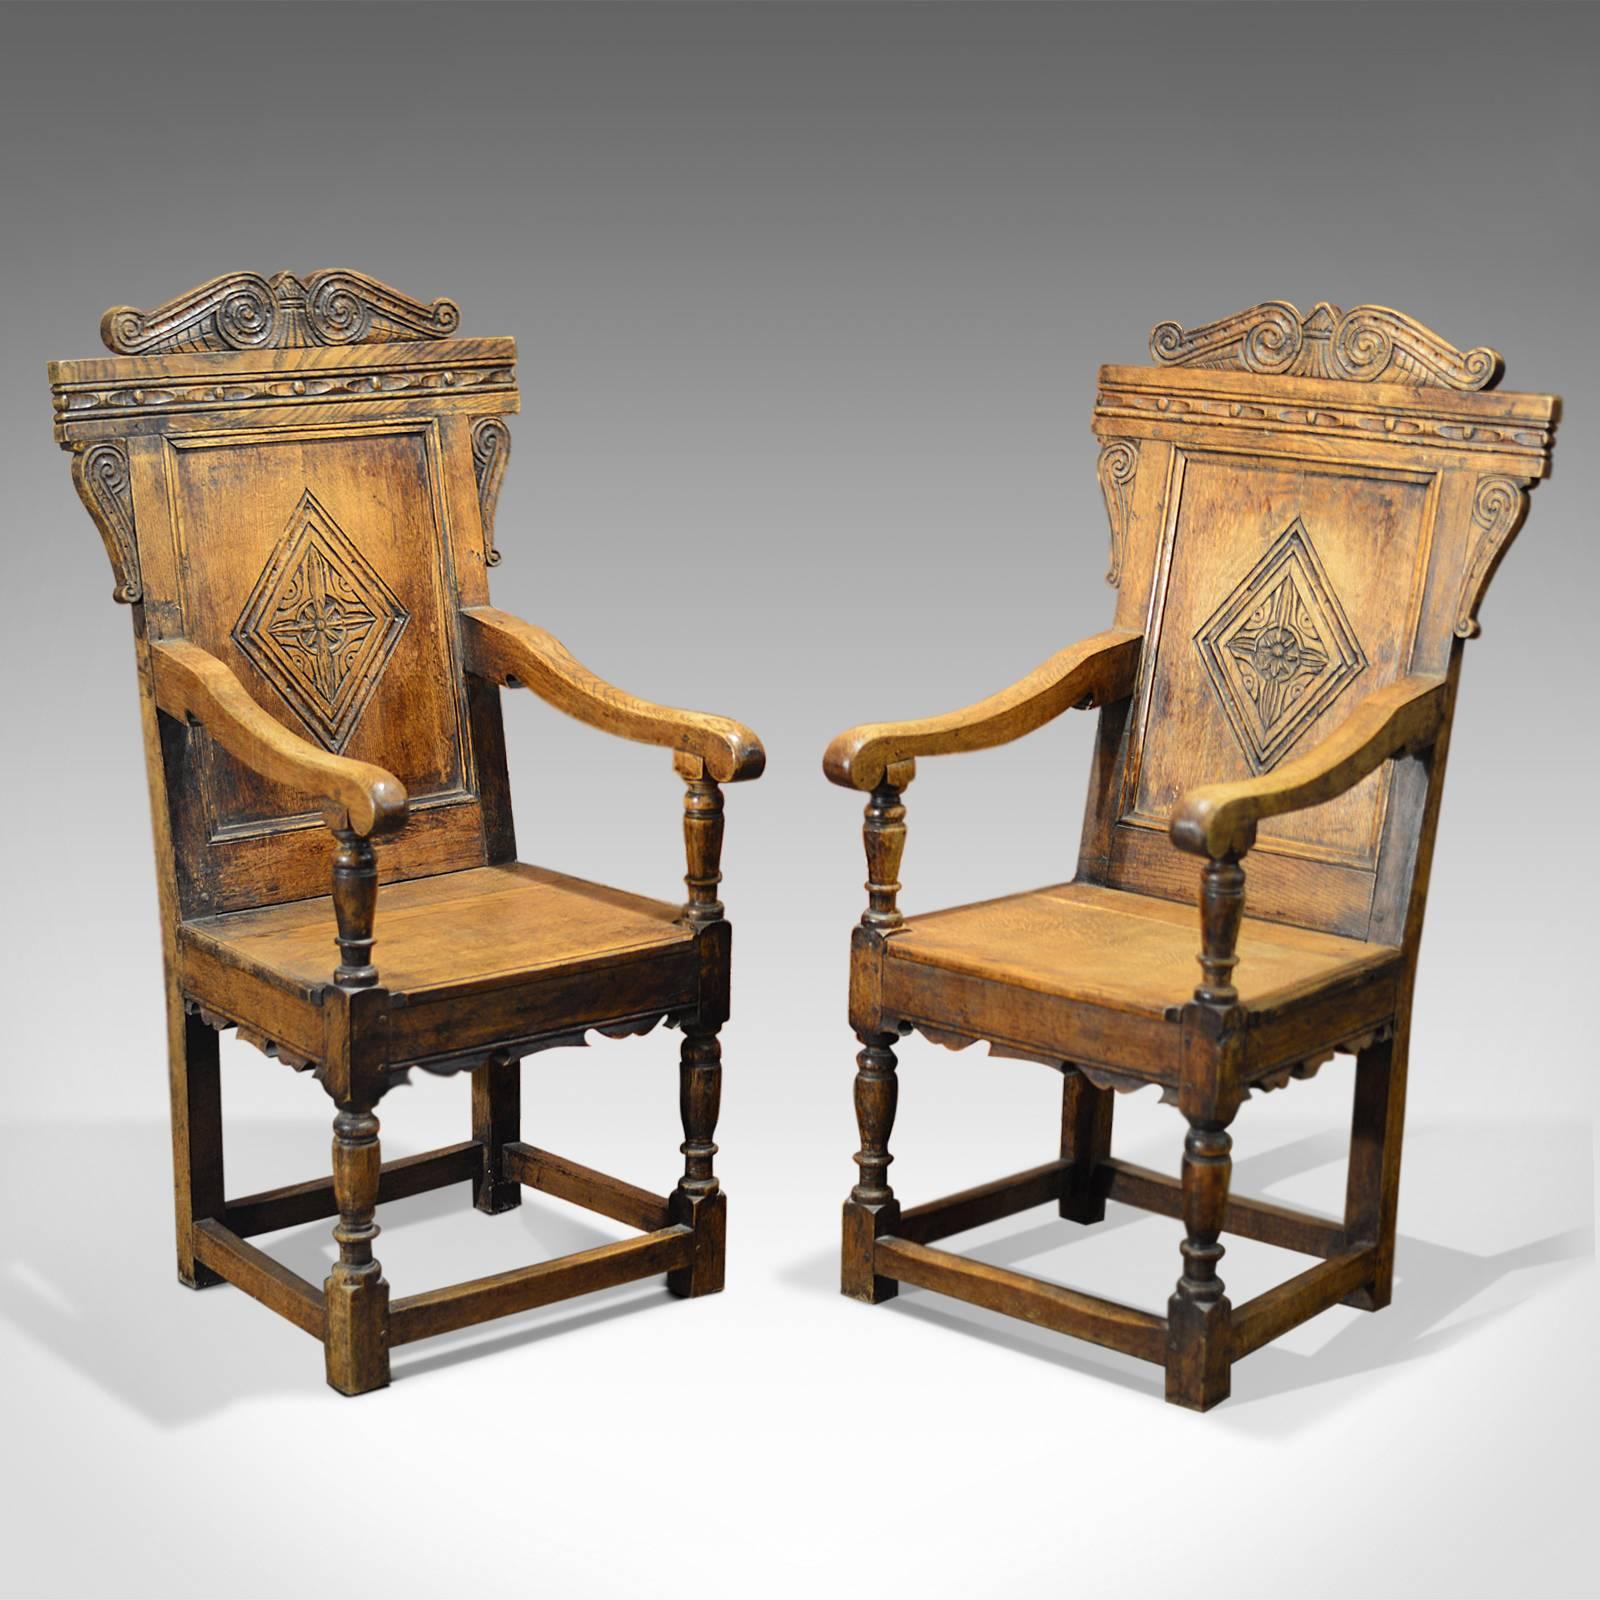 British Antique Pair of Hall Chairs, 19th Century, Baronial